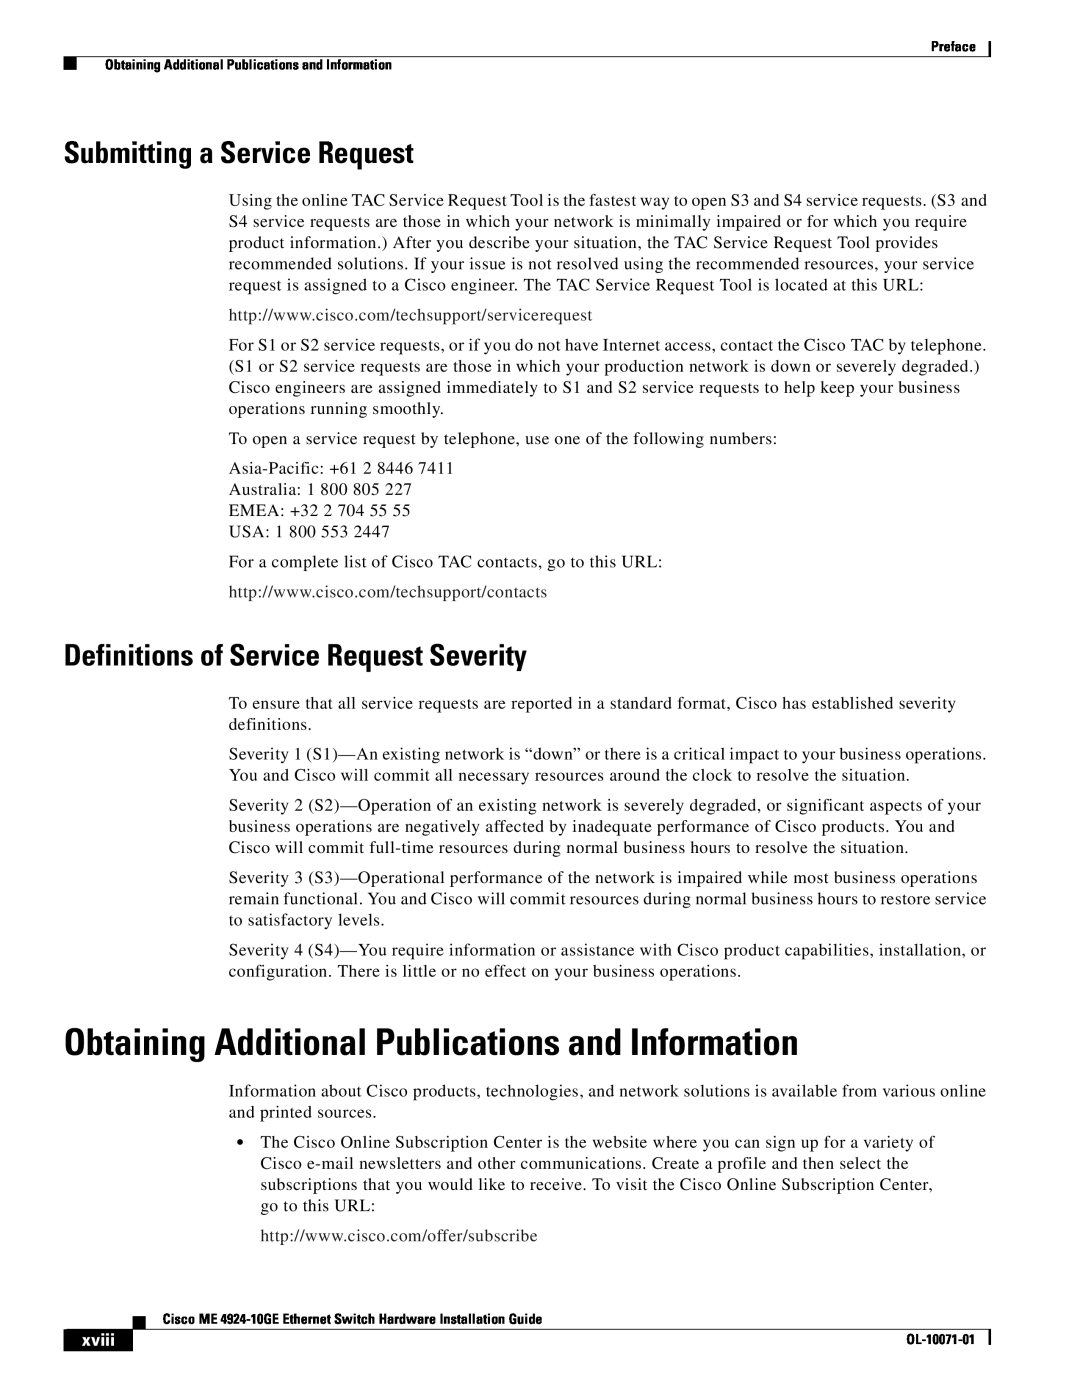 Cisco Systems ME 4924-10GE manual Obtaining Additional Publications and Information, Submitting a Service Request, xviii 